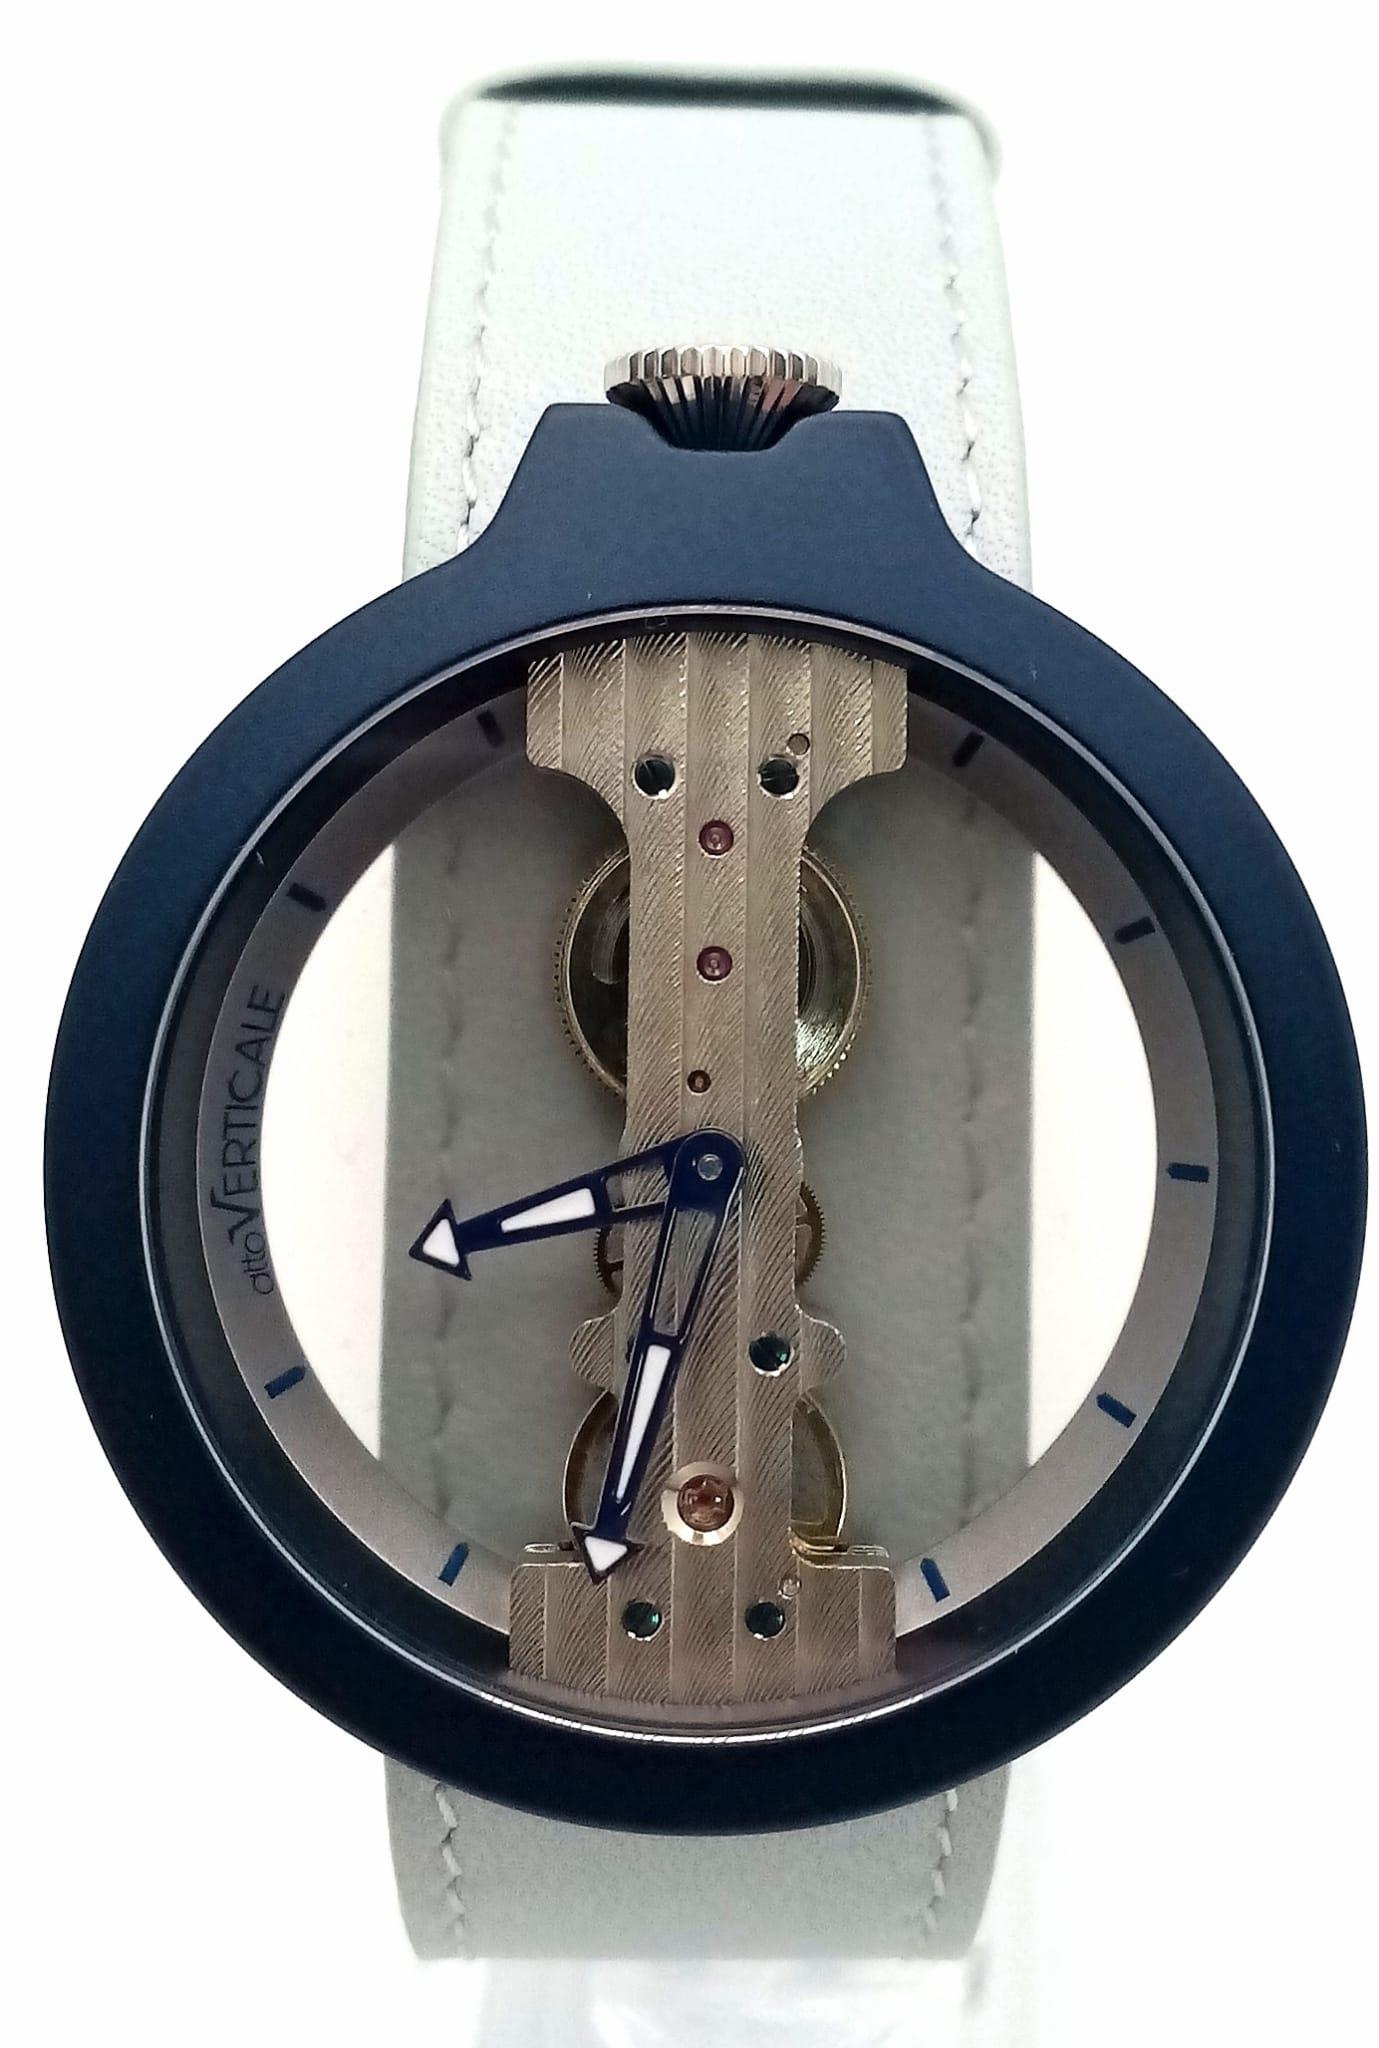 A Verticale Mechanical Top Winder Unisex Watch. Turquoise strap with navy toned skeleton case. As